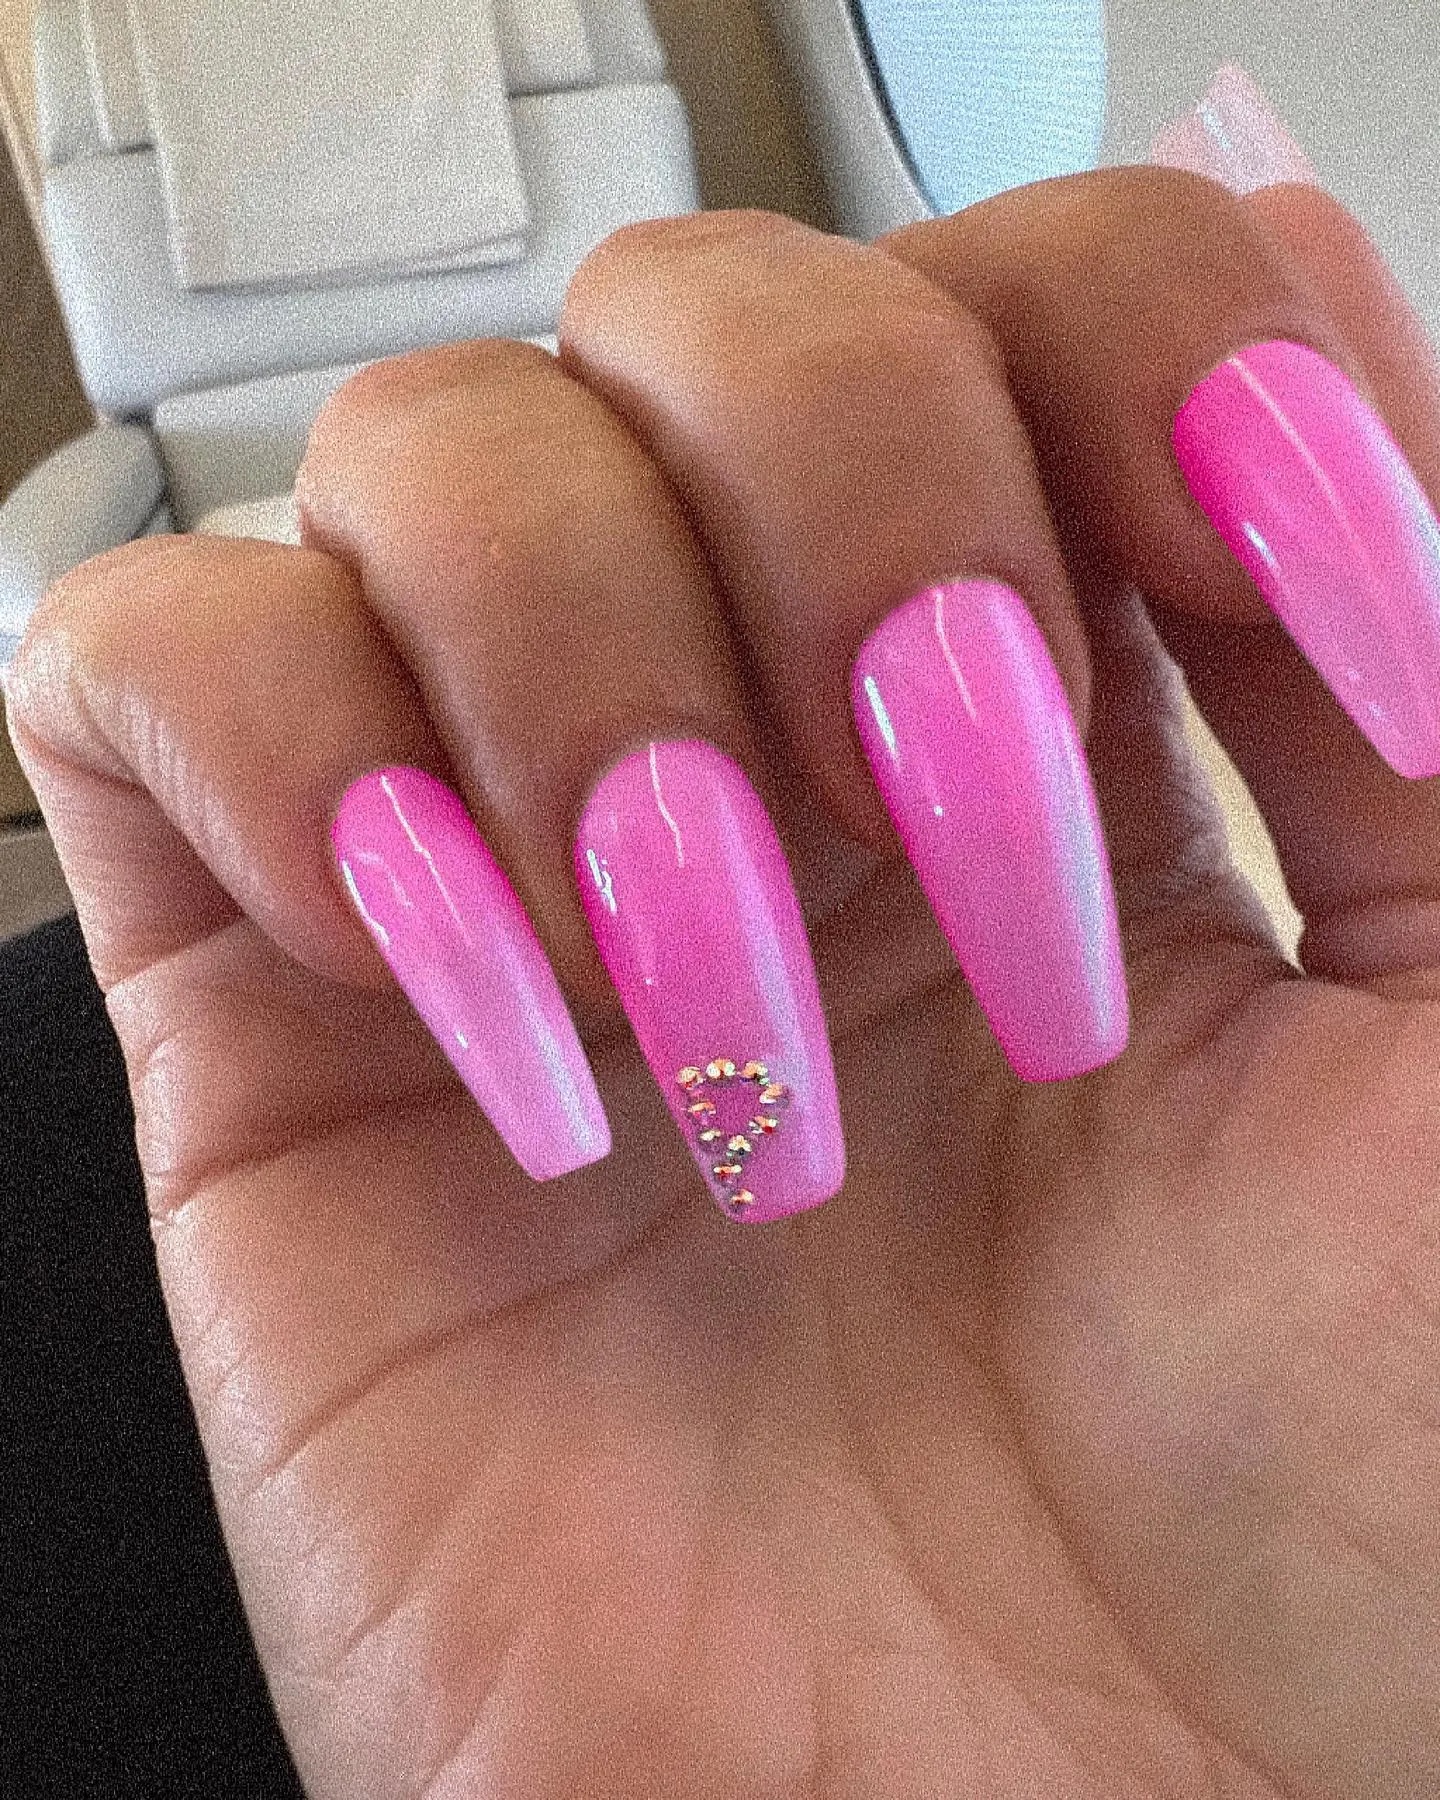 Sexy Moms With Big Nails